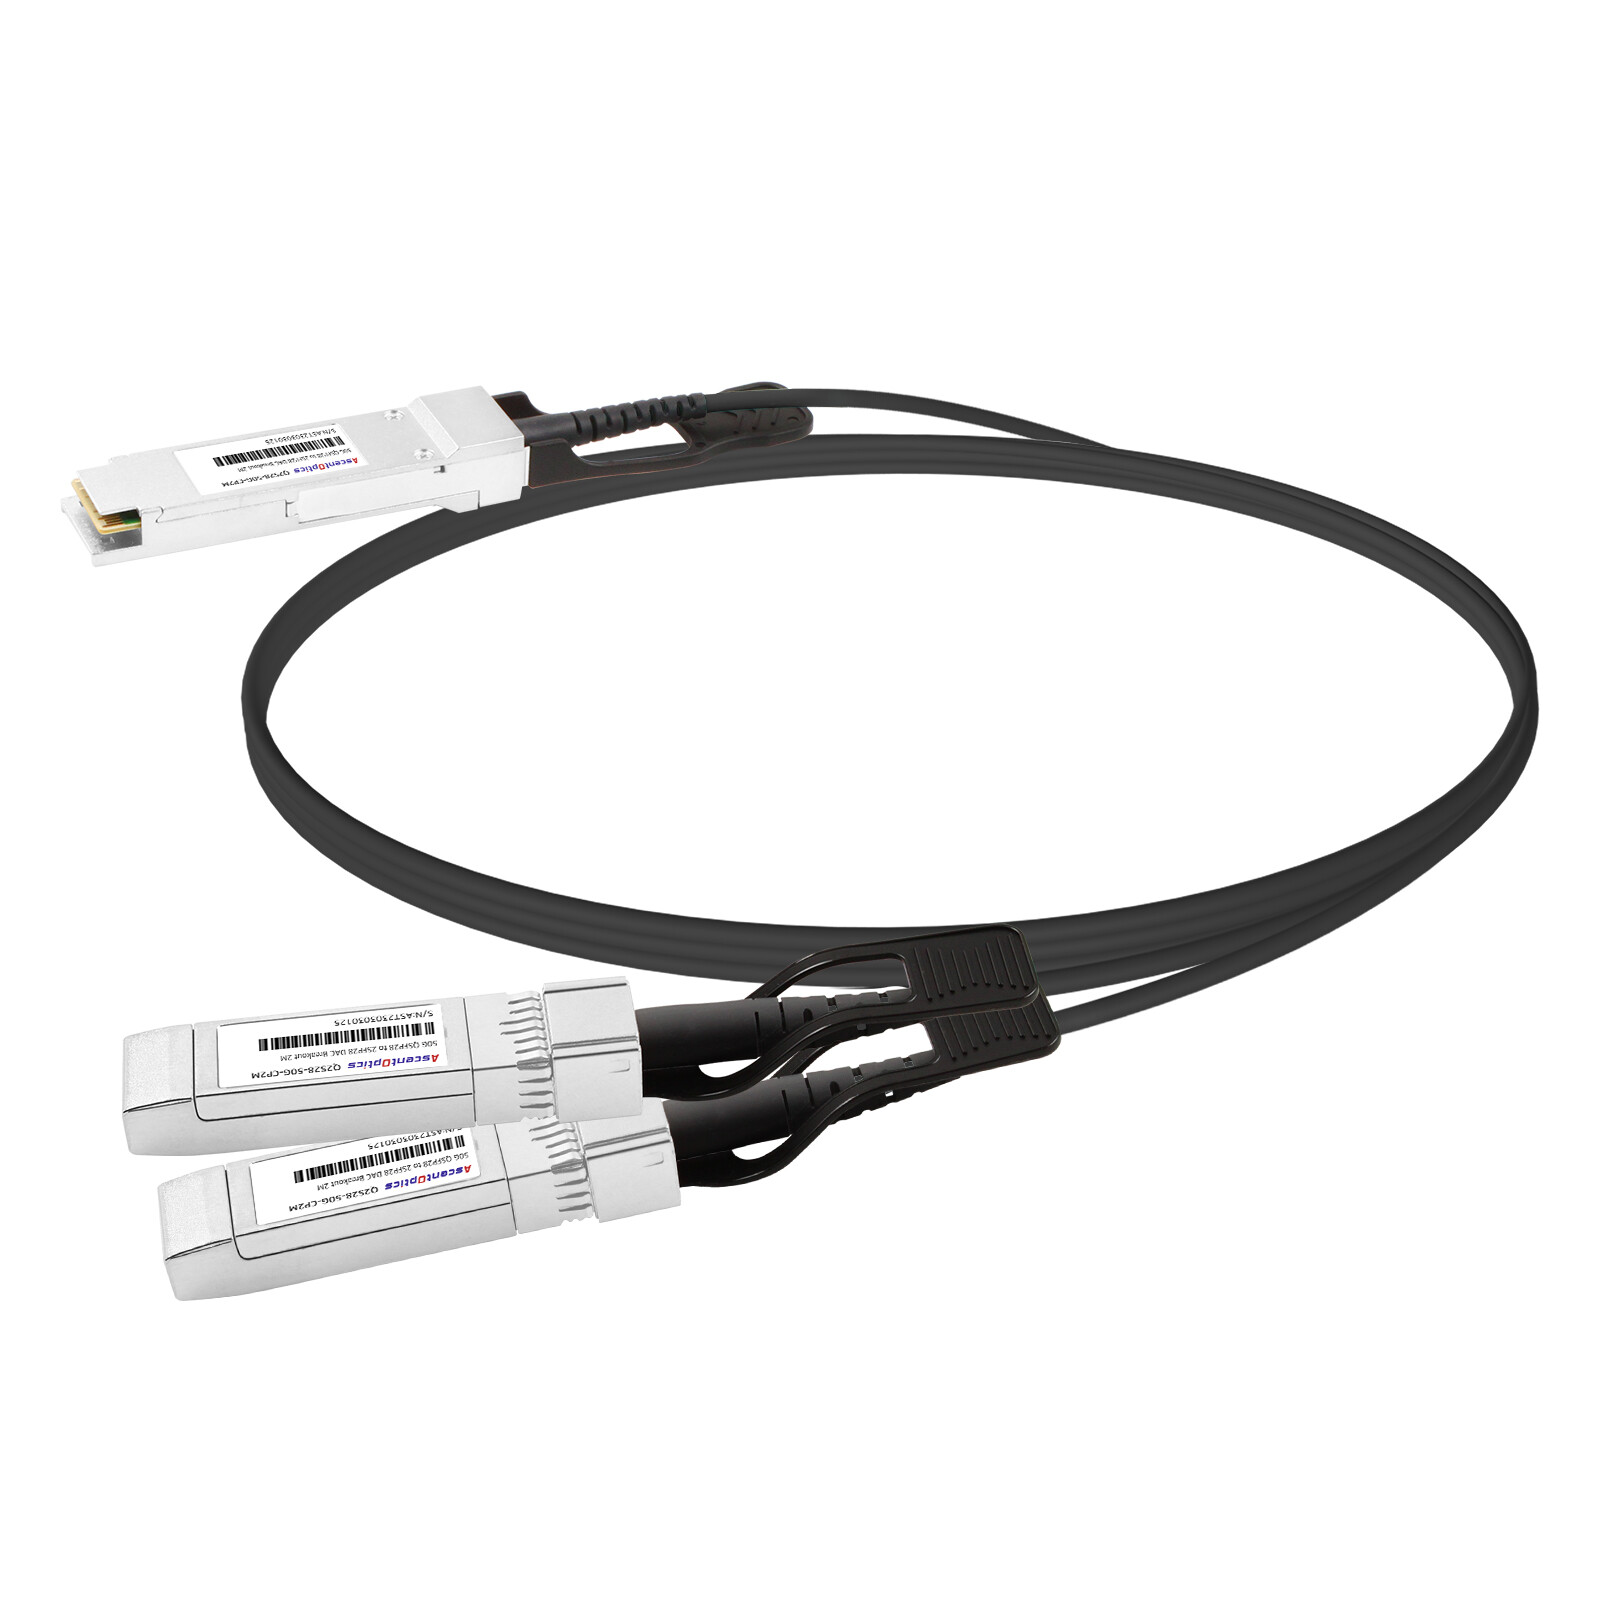 50G QSFP28 to 2x 25G SFP28 Copper Breakout Cable,2 Meters,Passive